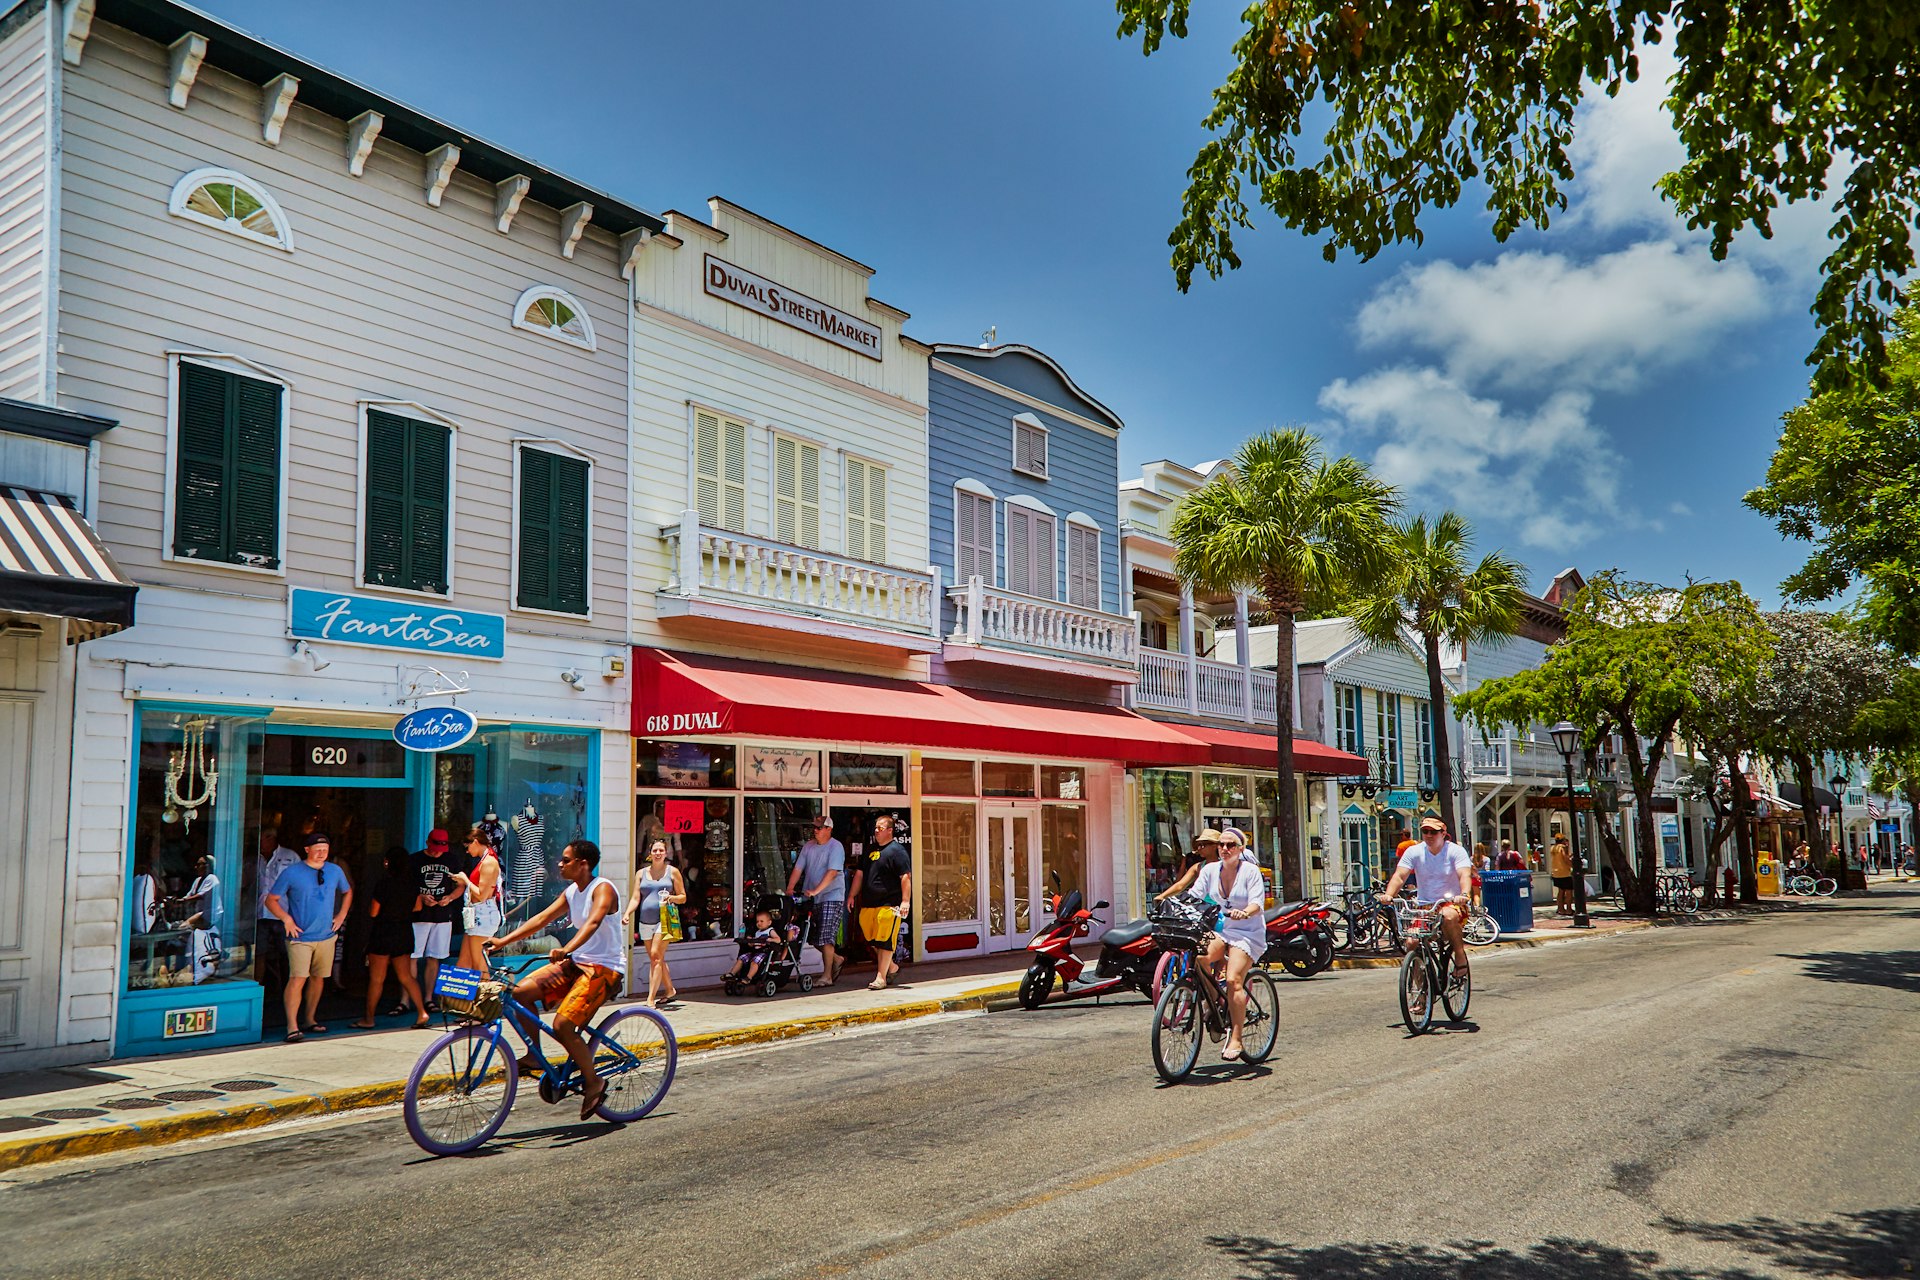 Cyclists riding past the colorful shopfronts on Duval Street in Key West